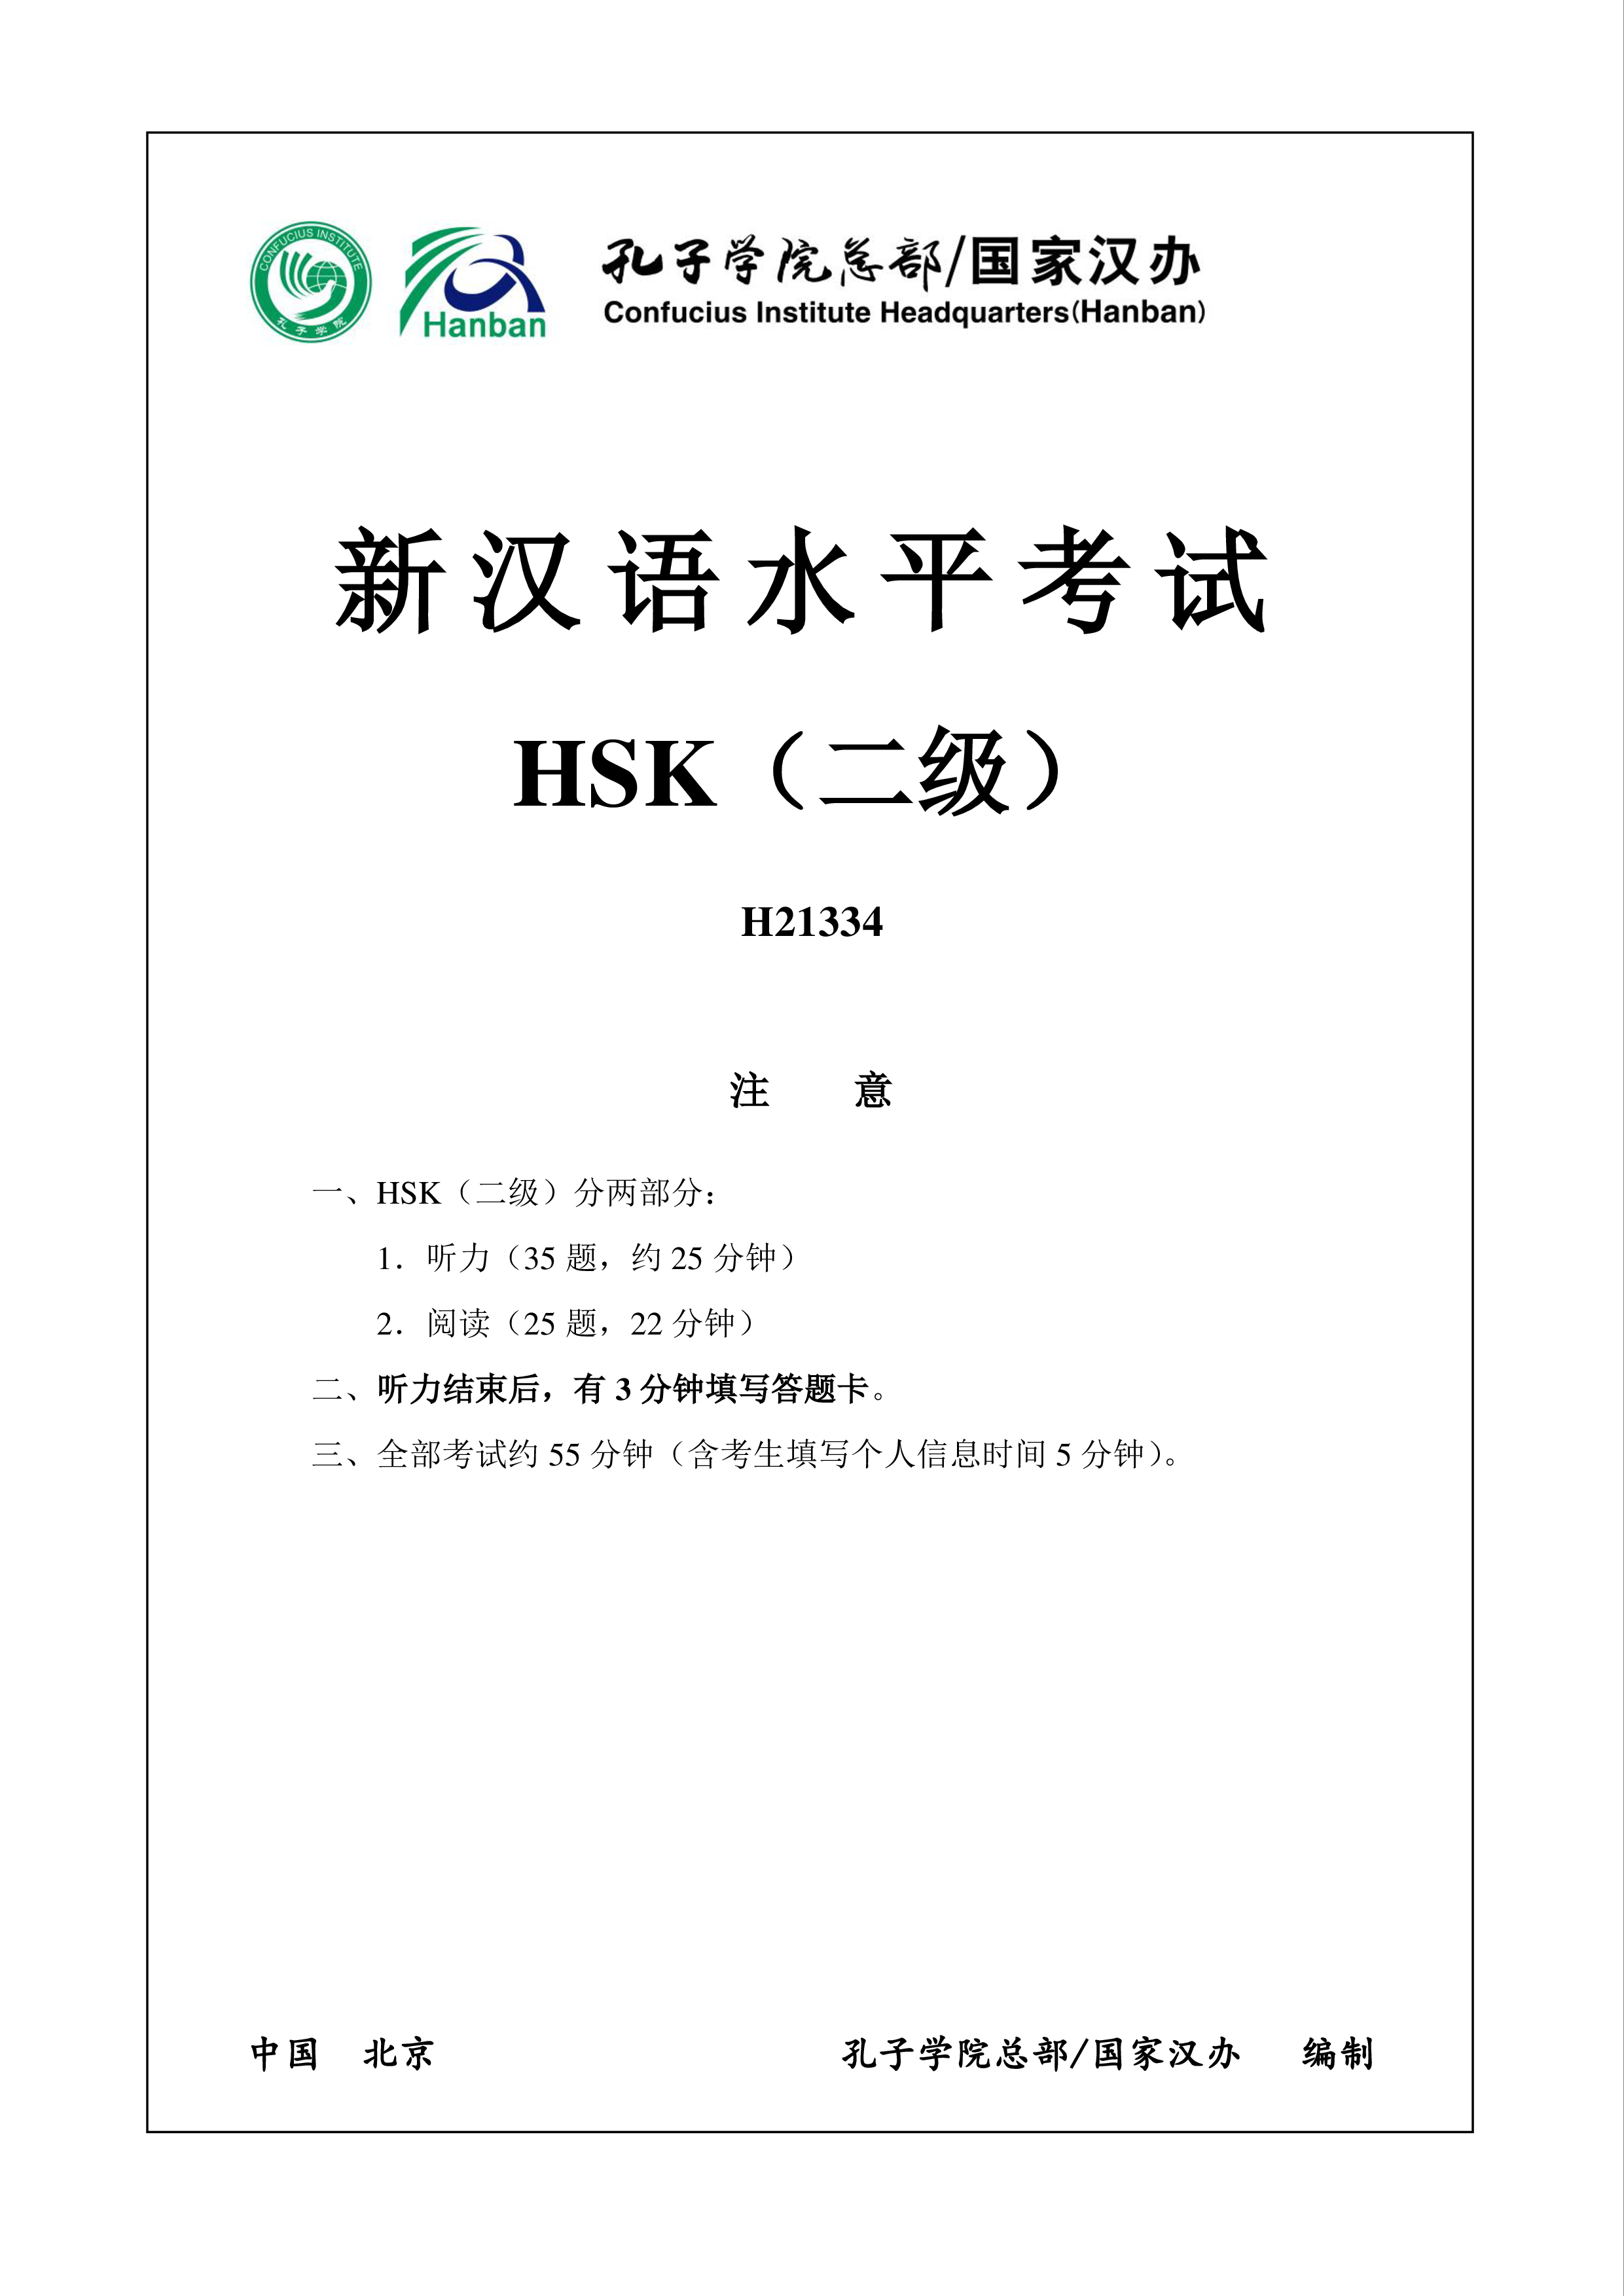 hsk2 chinese exam including answers # hsk2 h21334 plantilla imagen principal